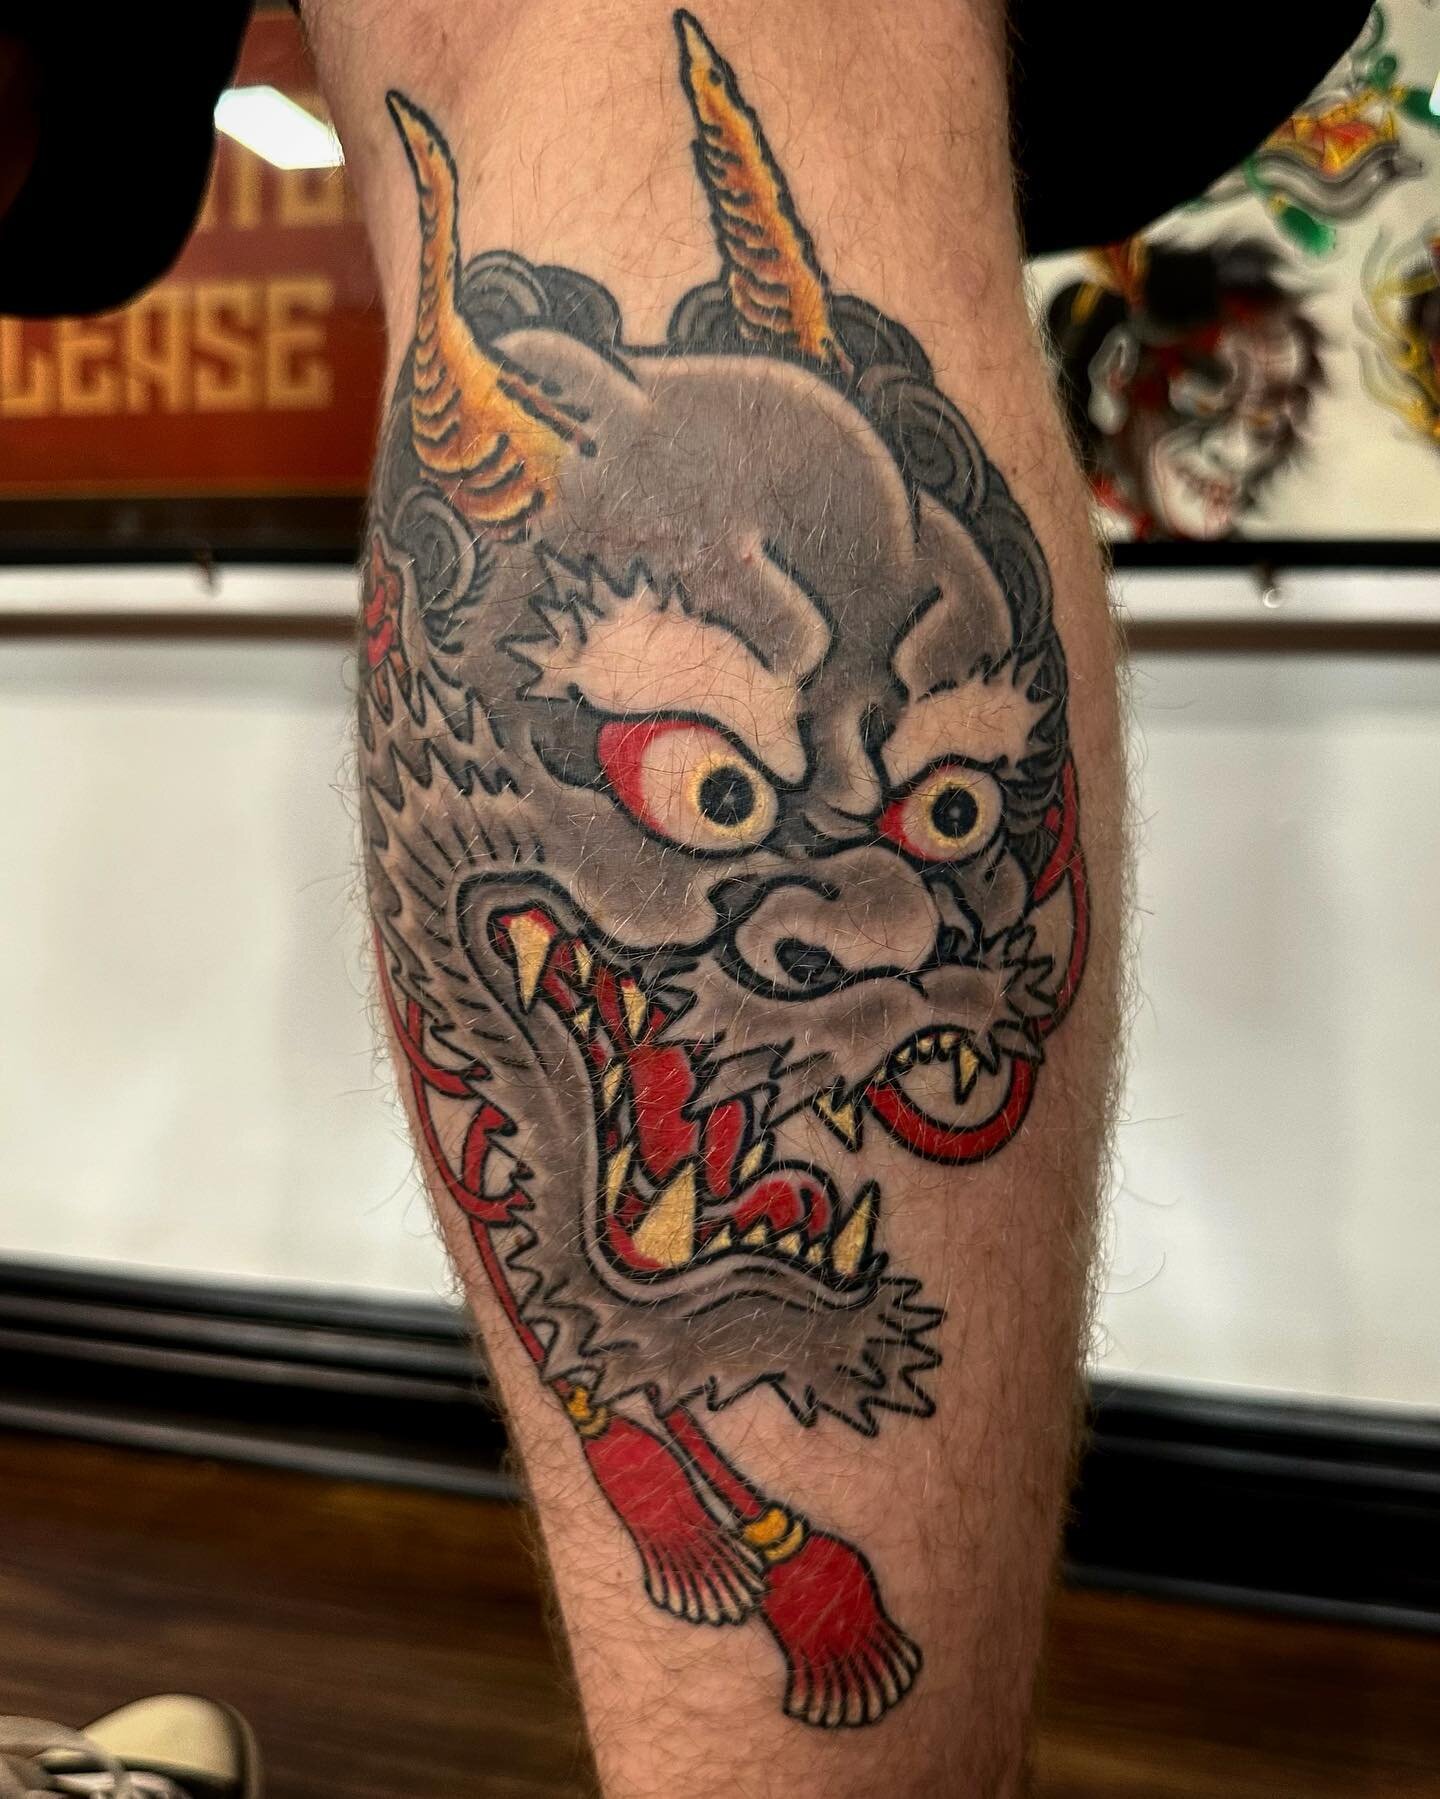 Got some healed shots of Matt&rsquo;s Oni mask. Thanks heaps mate! @lighthouse_tattoo 

#getabodysuit
Books always open. 
Hit the website link to make an enquiry.

Using:-
@thesolidink 
@lotusneedles 
@vladbladirons 
@bamboogoo.au 
.
.
.
.
.
.
.
.
.
